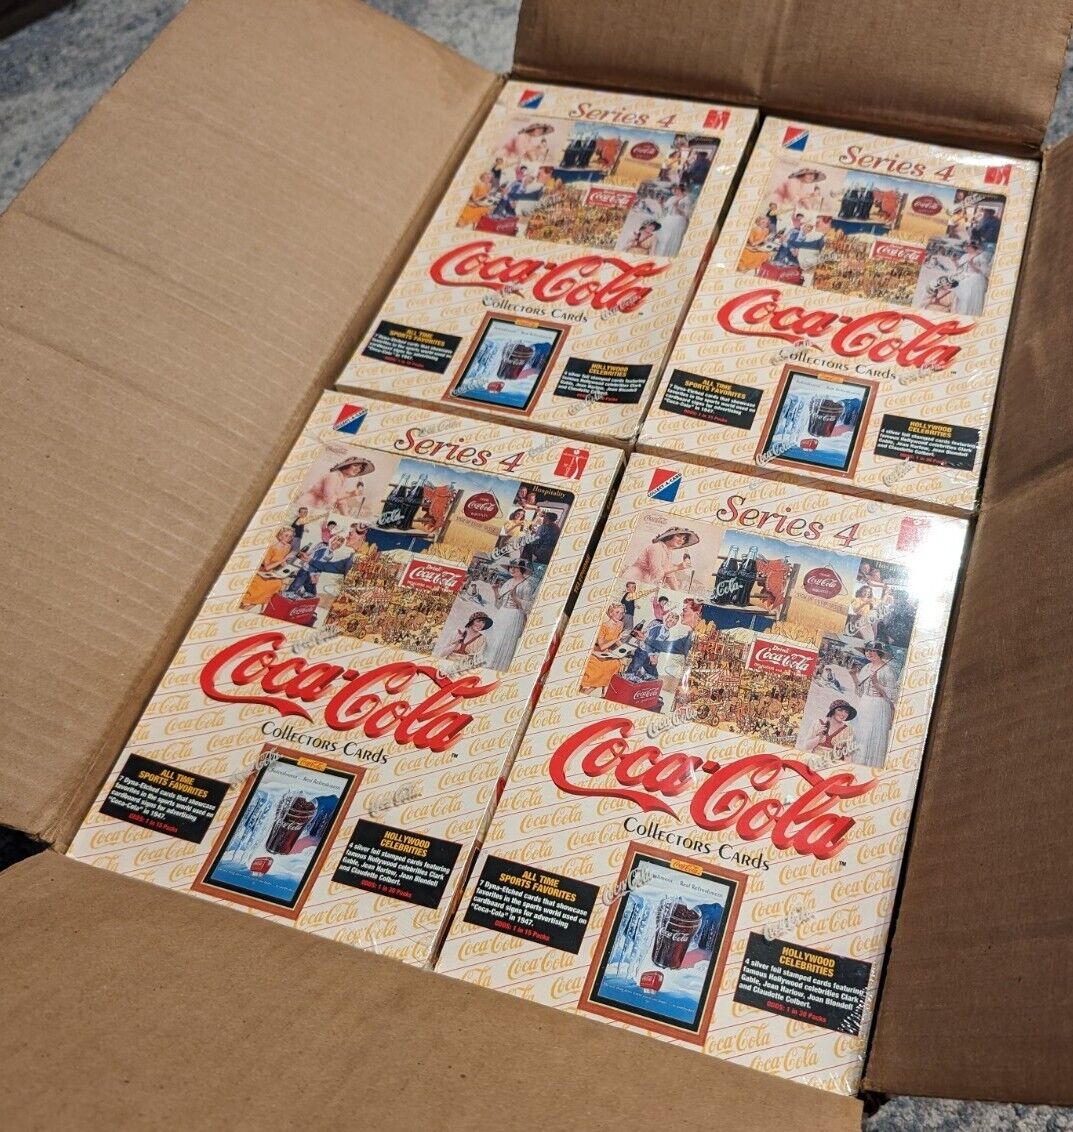 1995 Coca Cola Series 4 Trading Card Set of 16 Sealed Wax Boxes